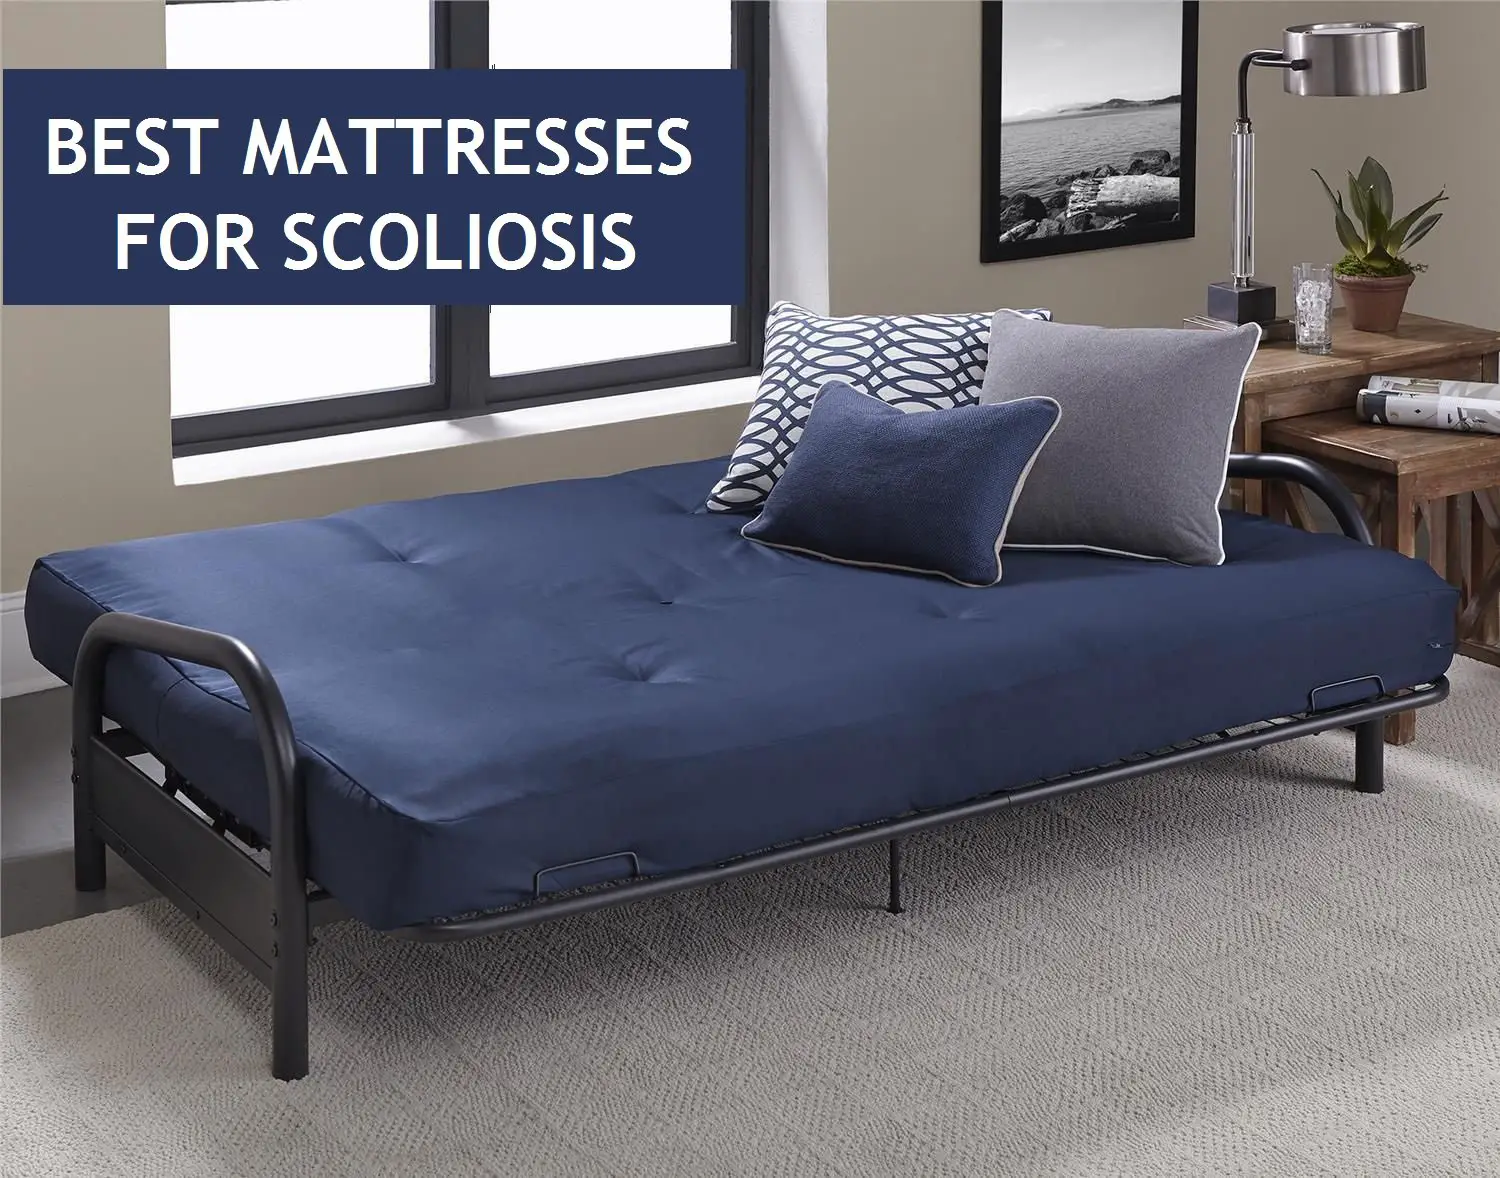 TOP 7 Best Mattresses For Scoliosis